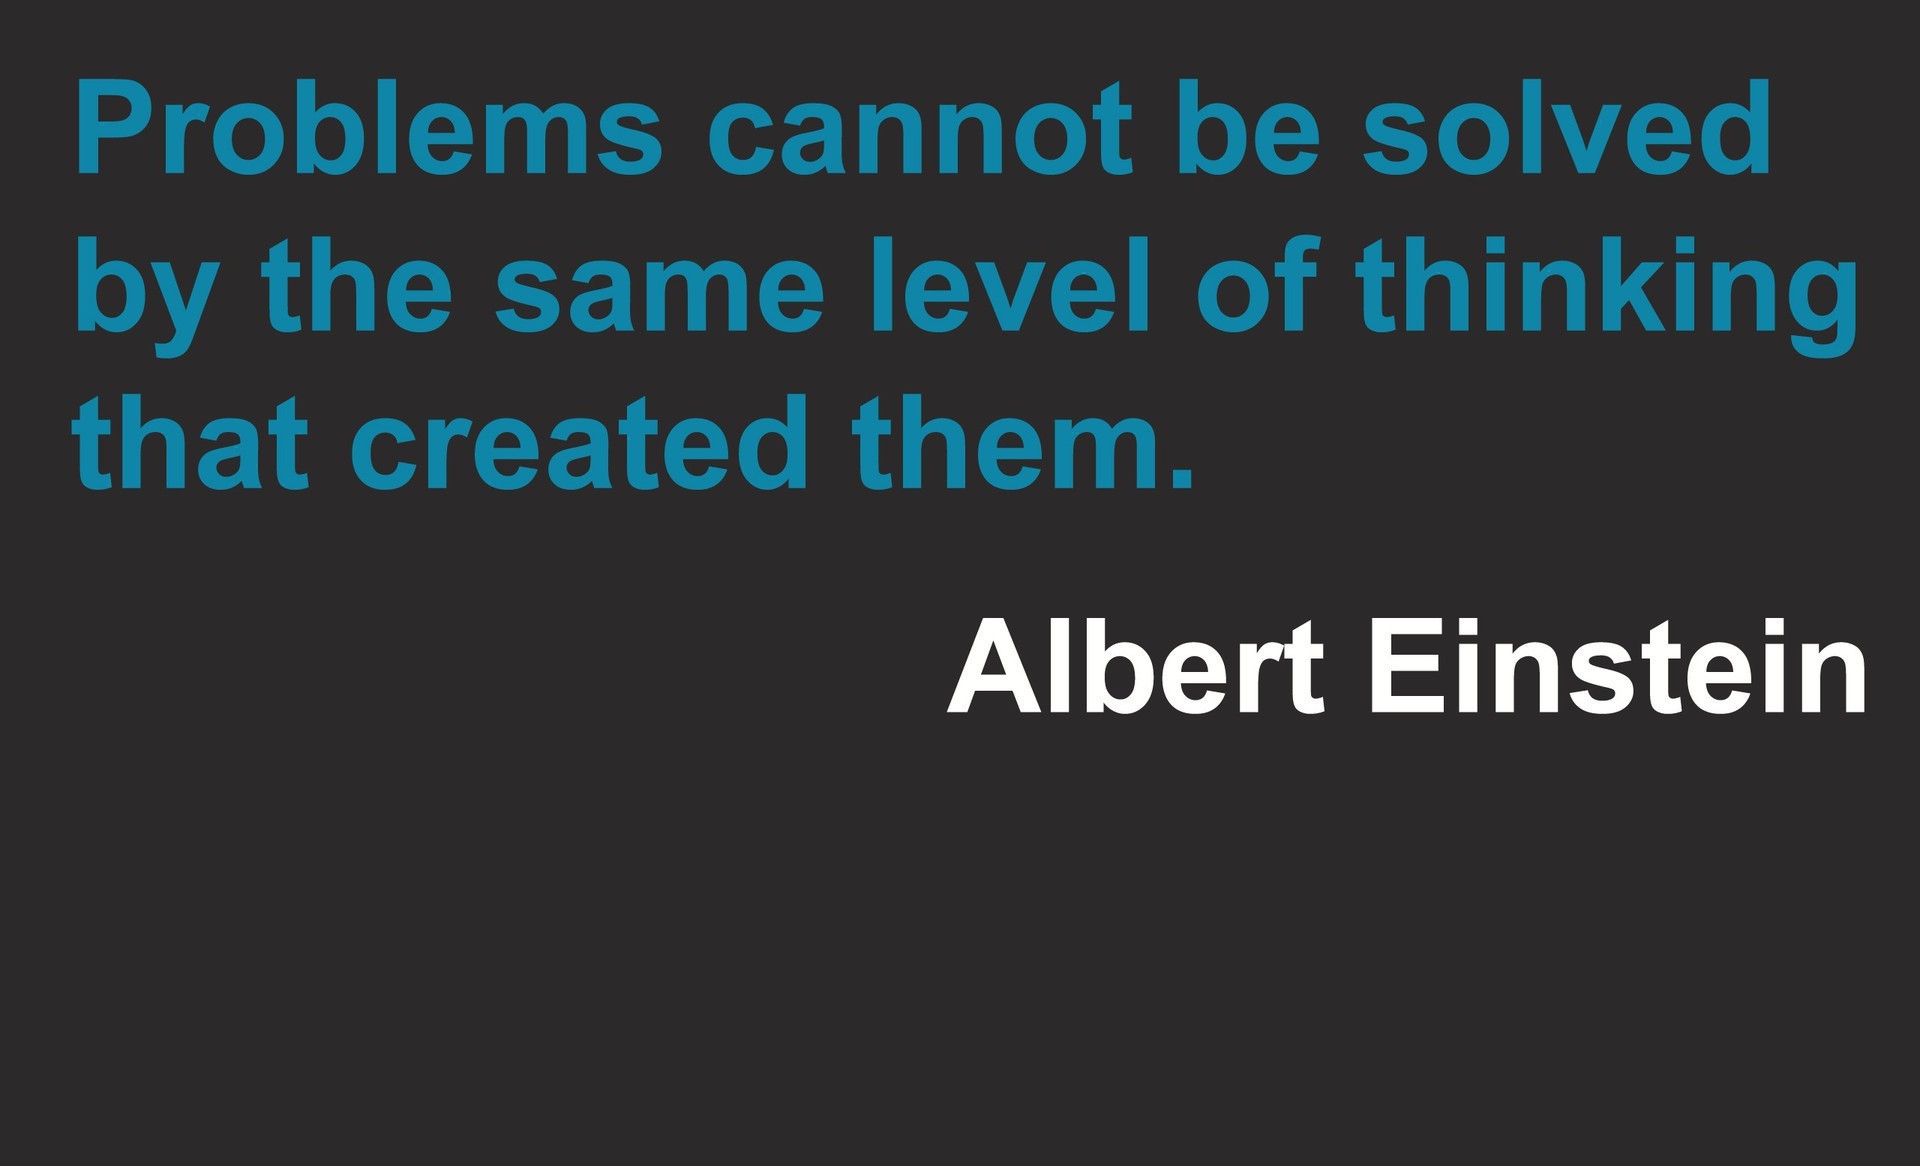 problems cannot be solved by the same level of thinking that created